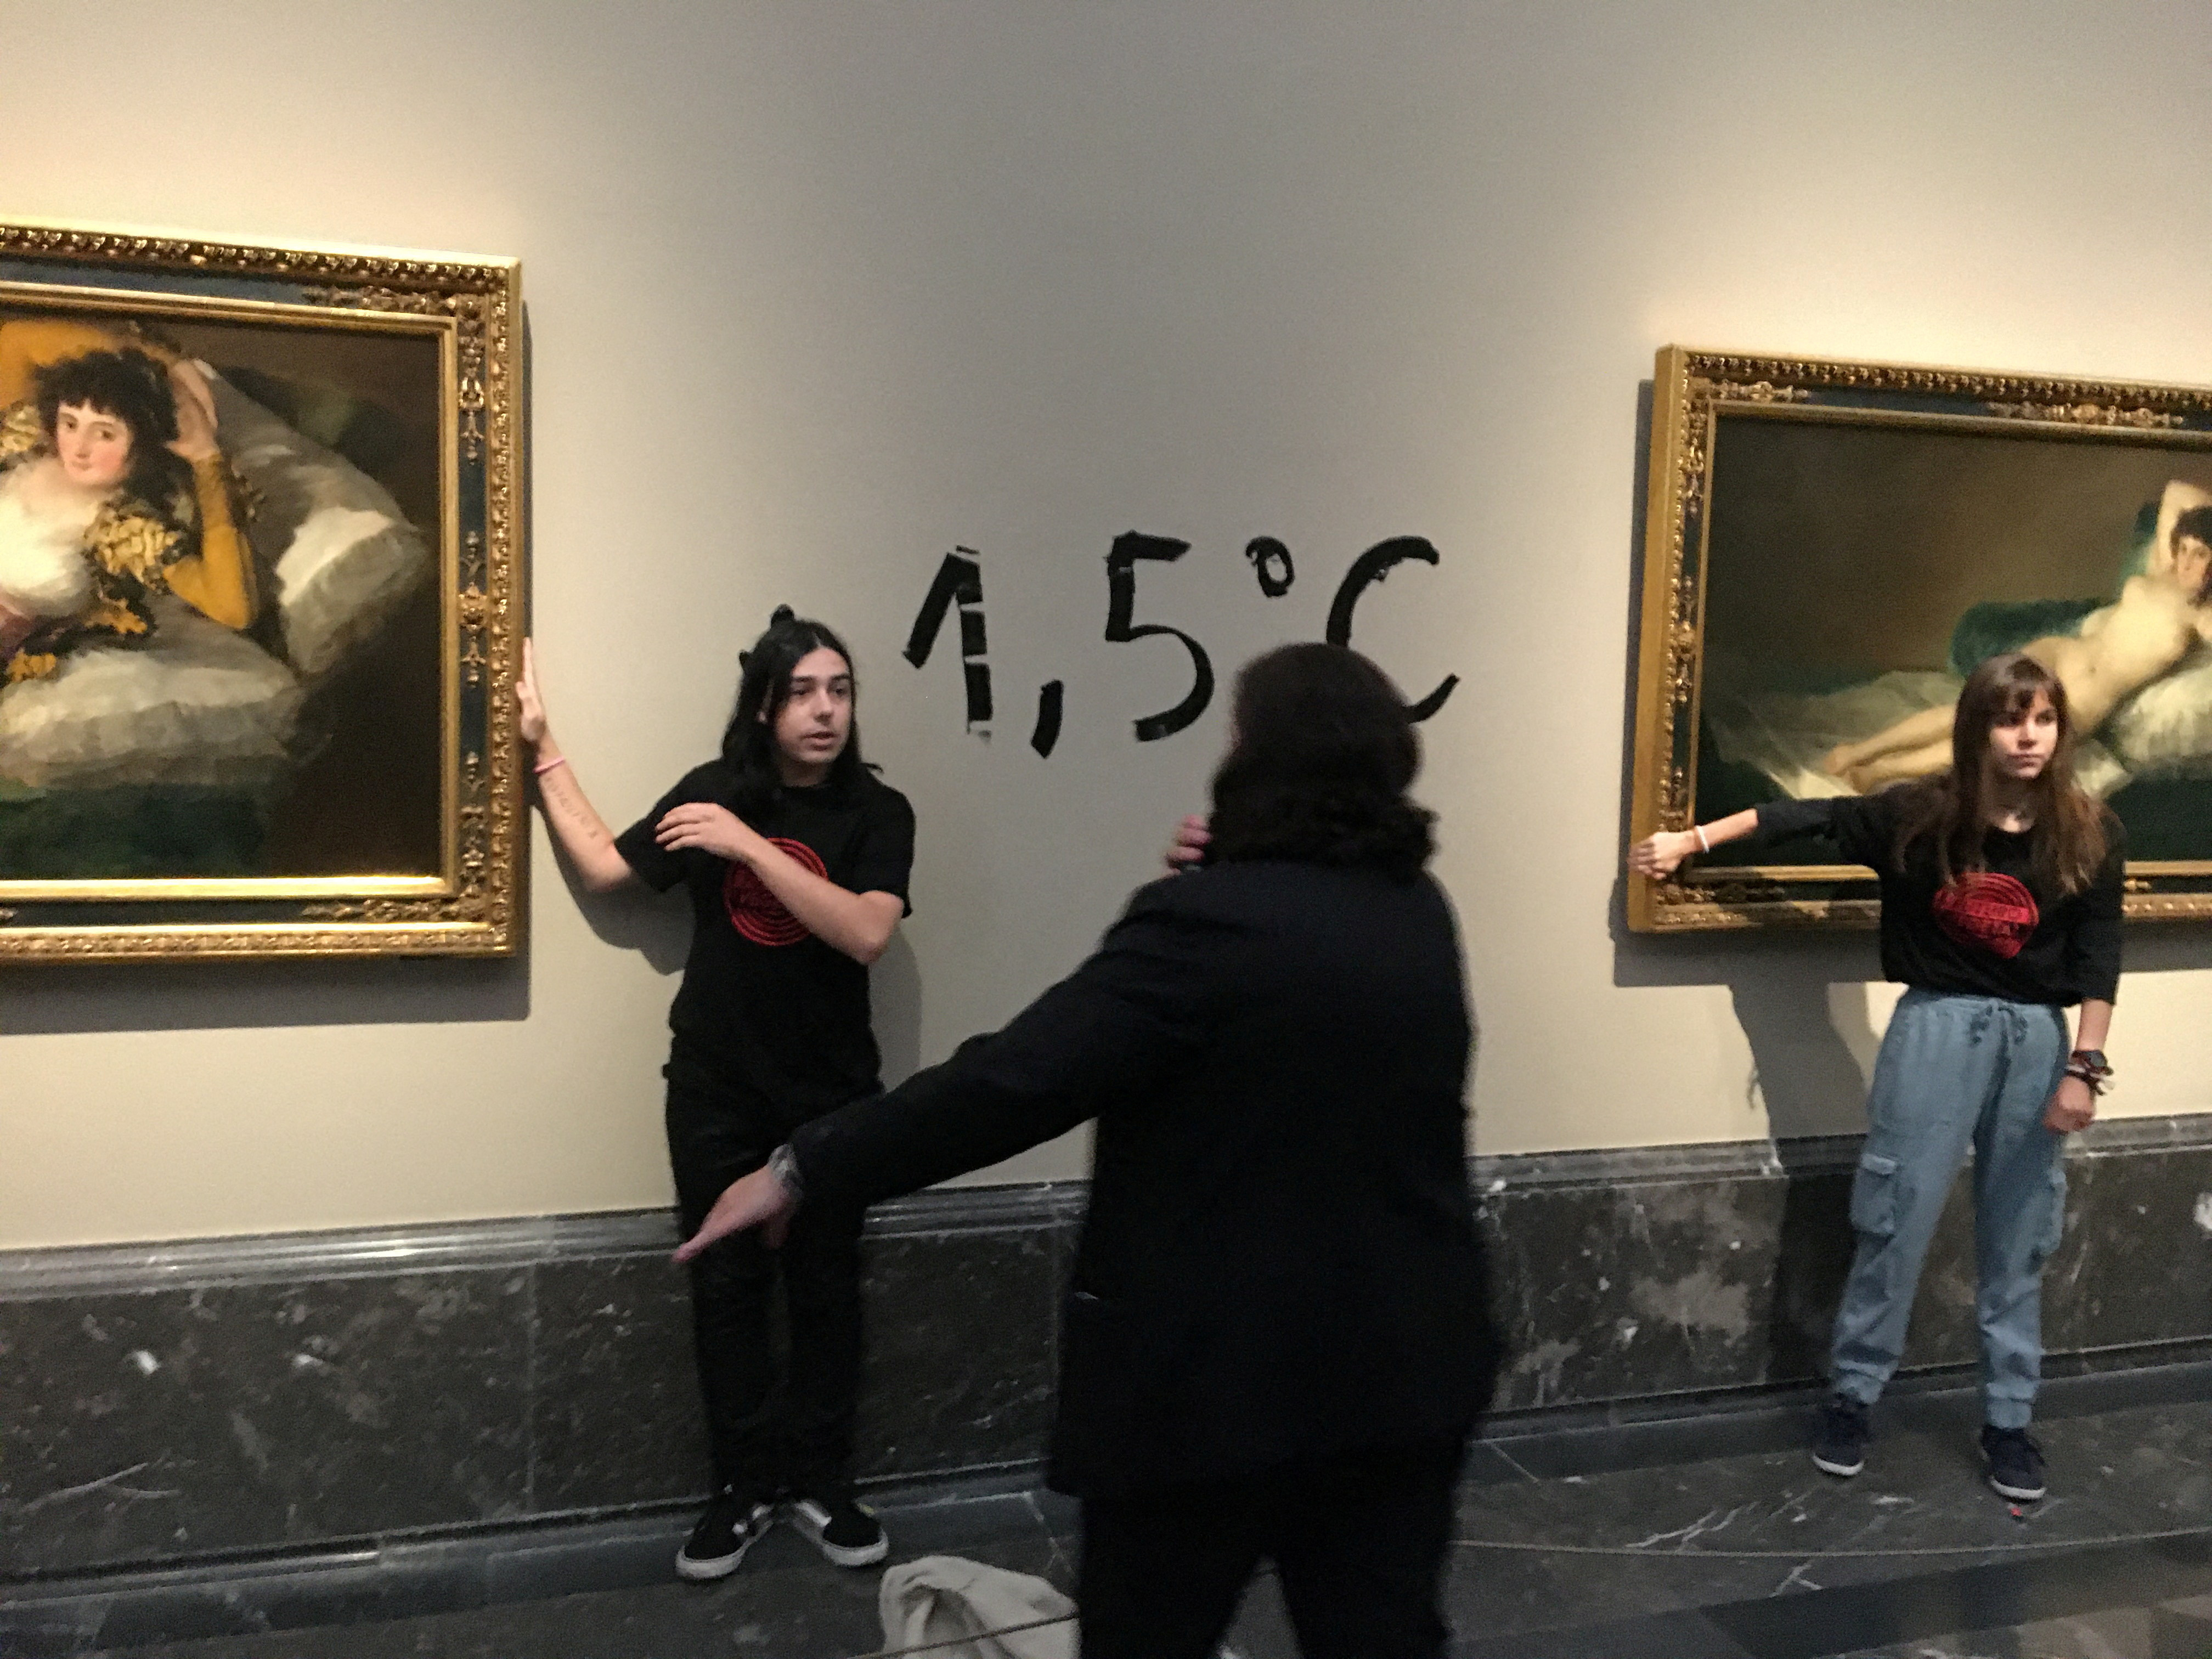 glue themselves Goya paintings Spanish climate protest | Reuters